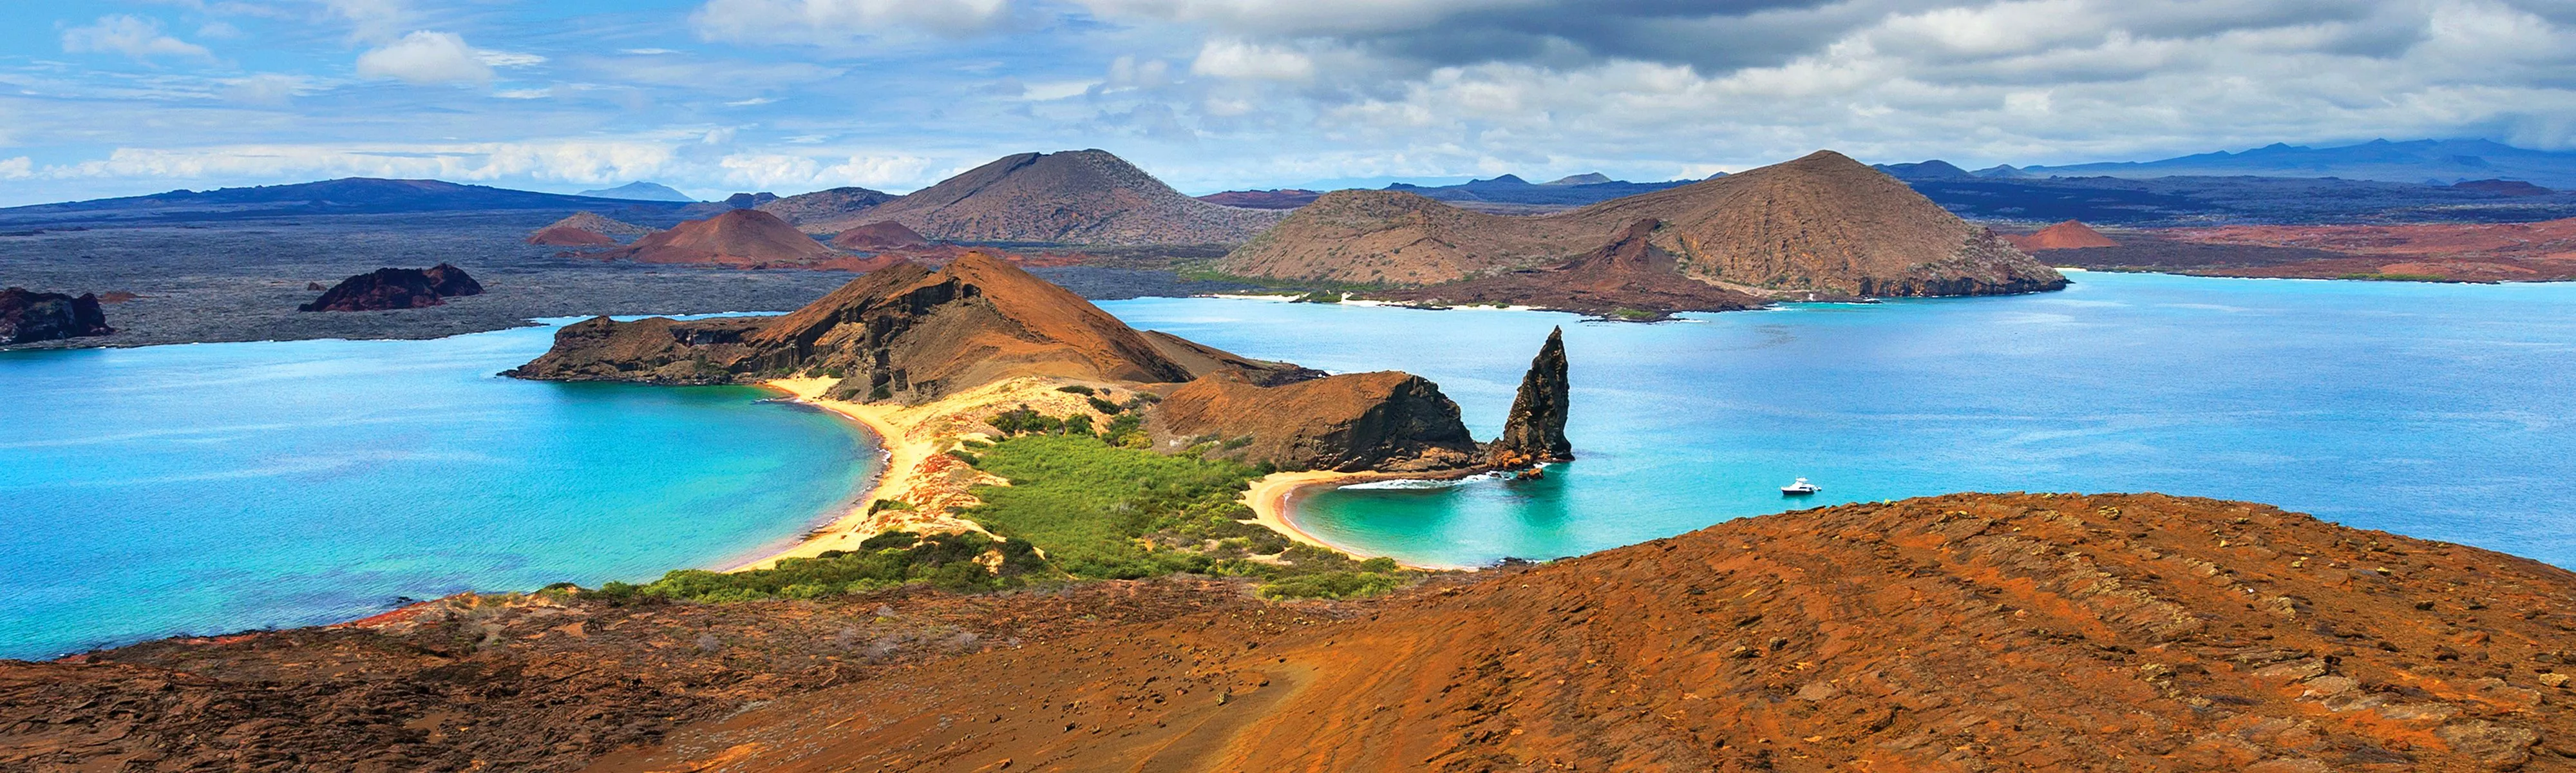 Galapagos Islands in Ecuador, South America | Surfing,Beaches - Rated 4.1